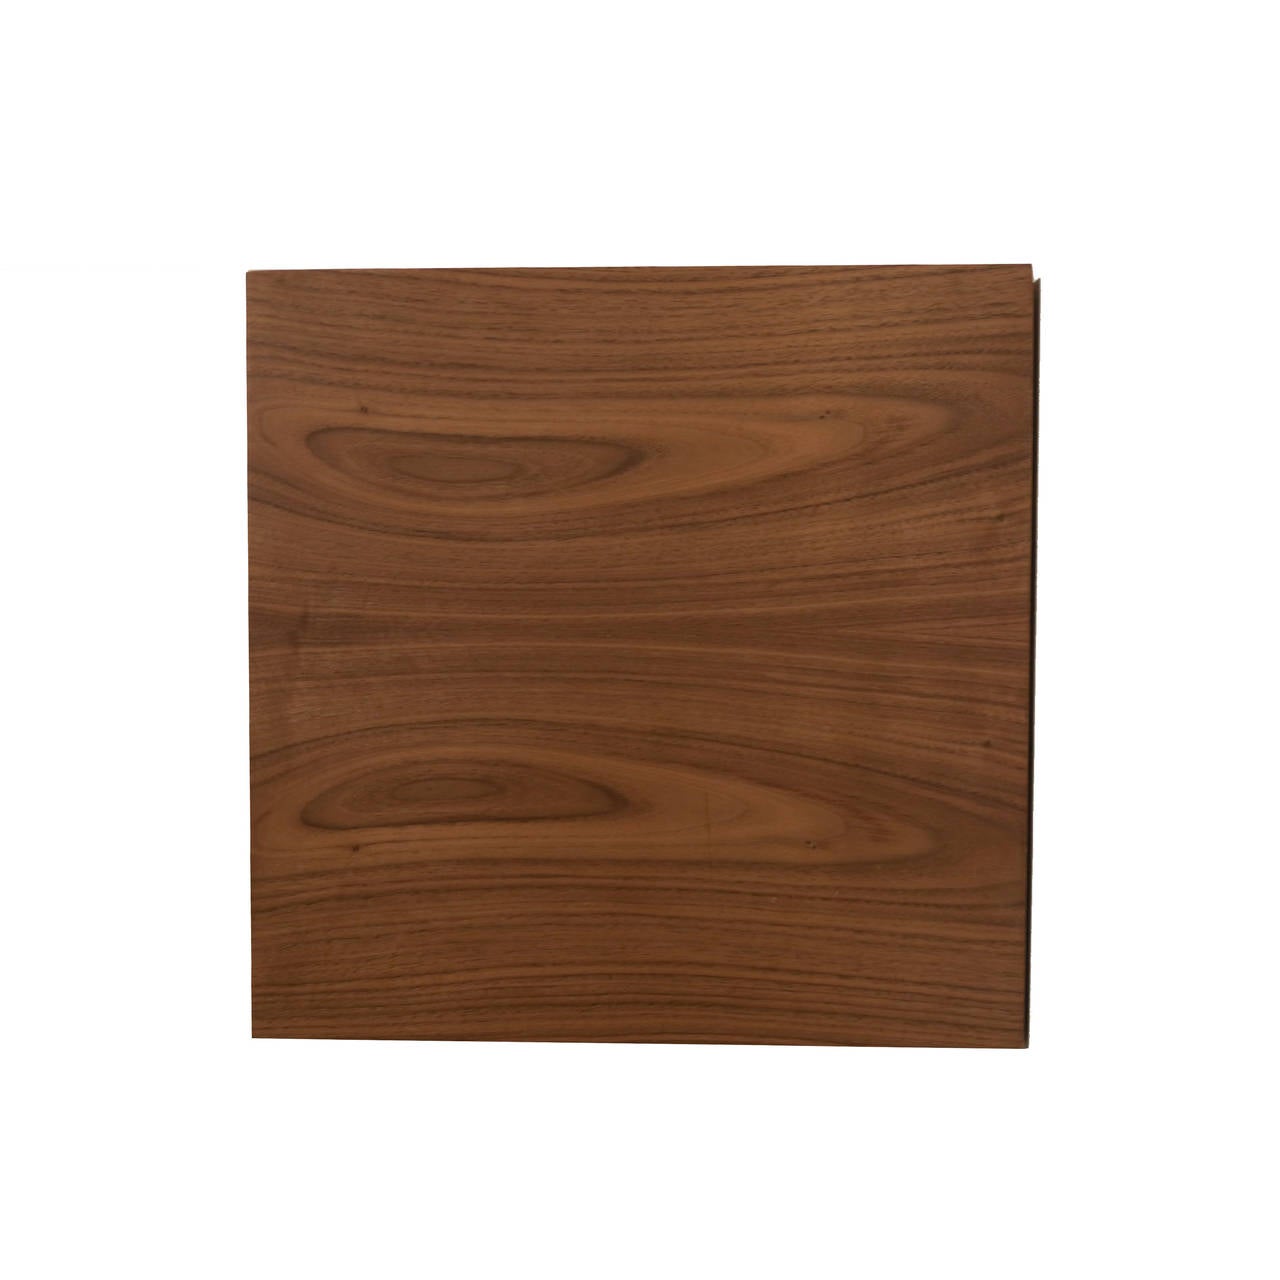 Oiled The Squared Floating Credezna in Walnut with Copper Doors by Thomas Hayes Studio